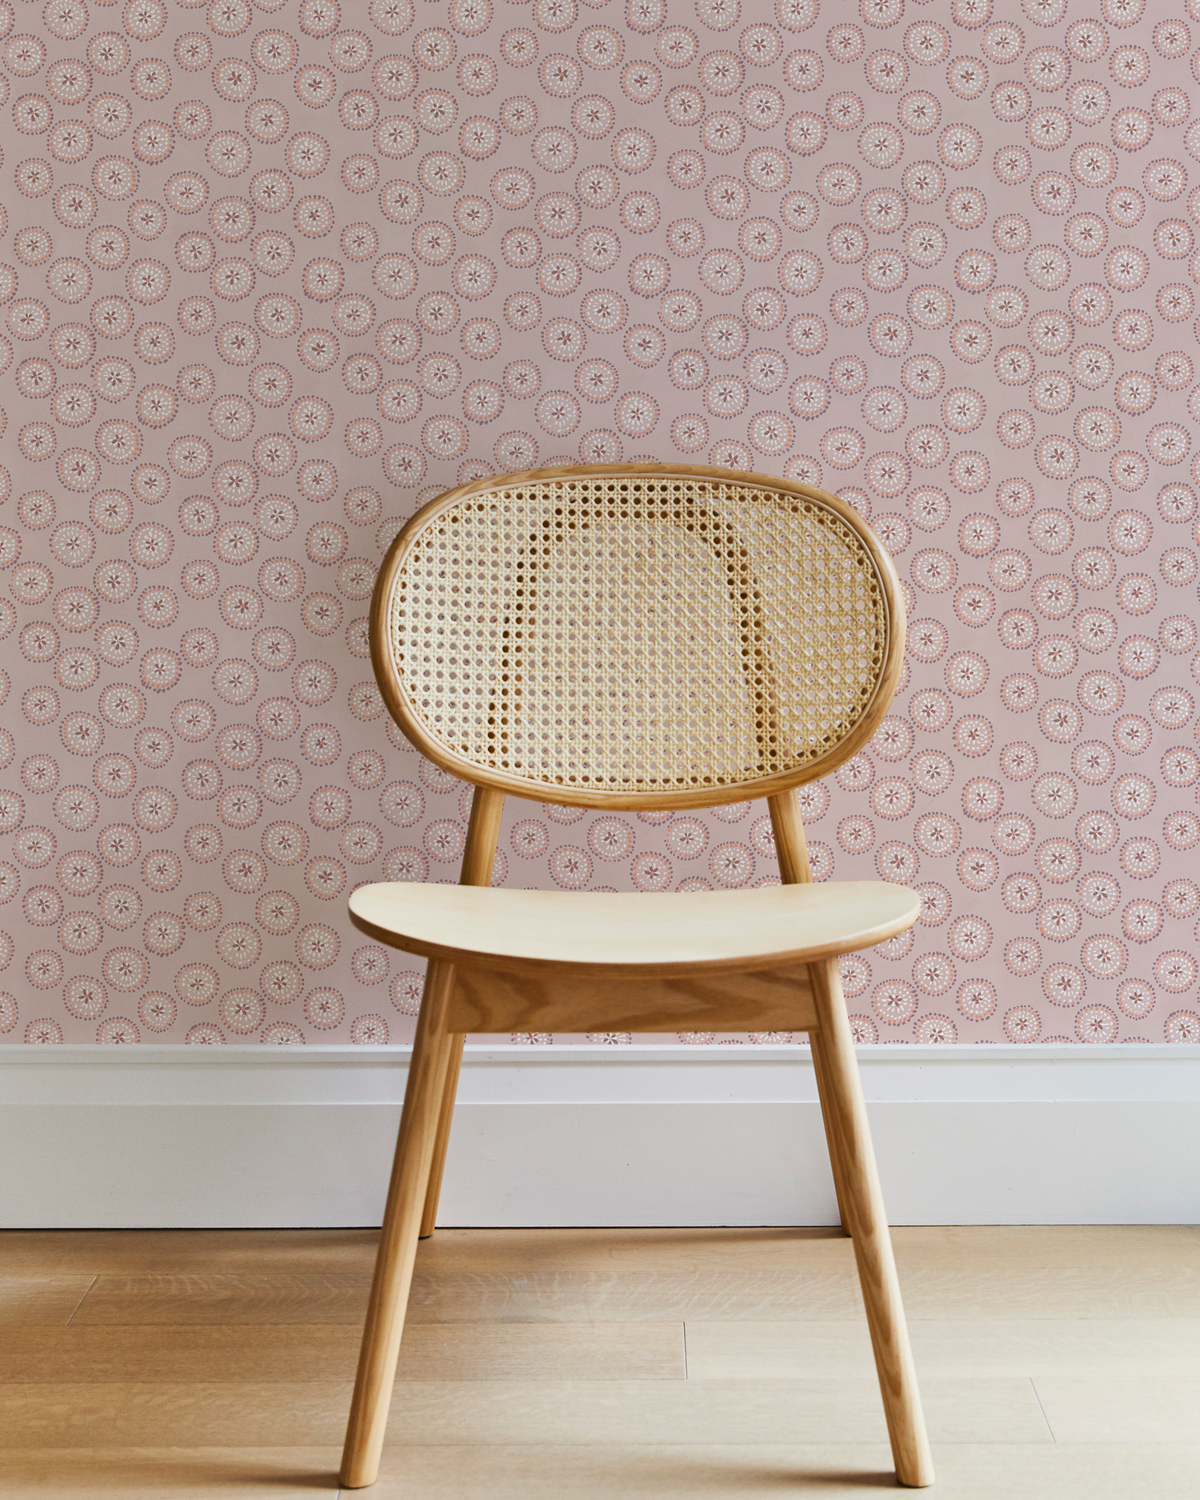 Dotted Floral Wallpaper in Pale Mauve